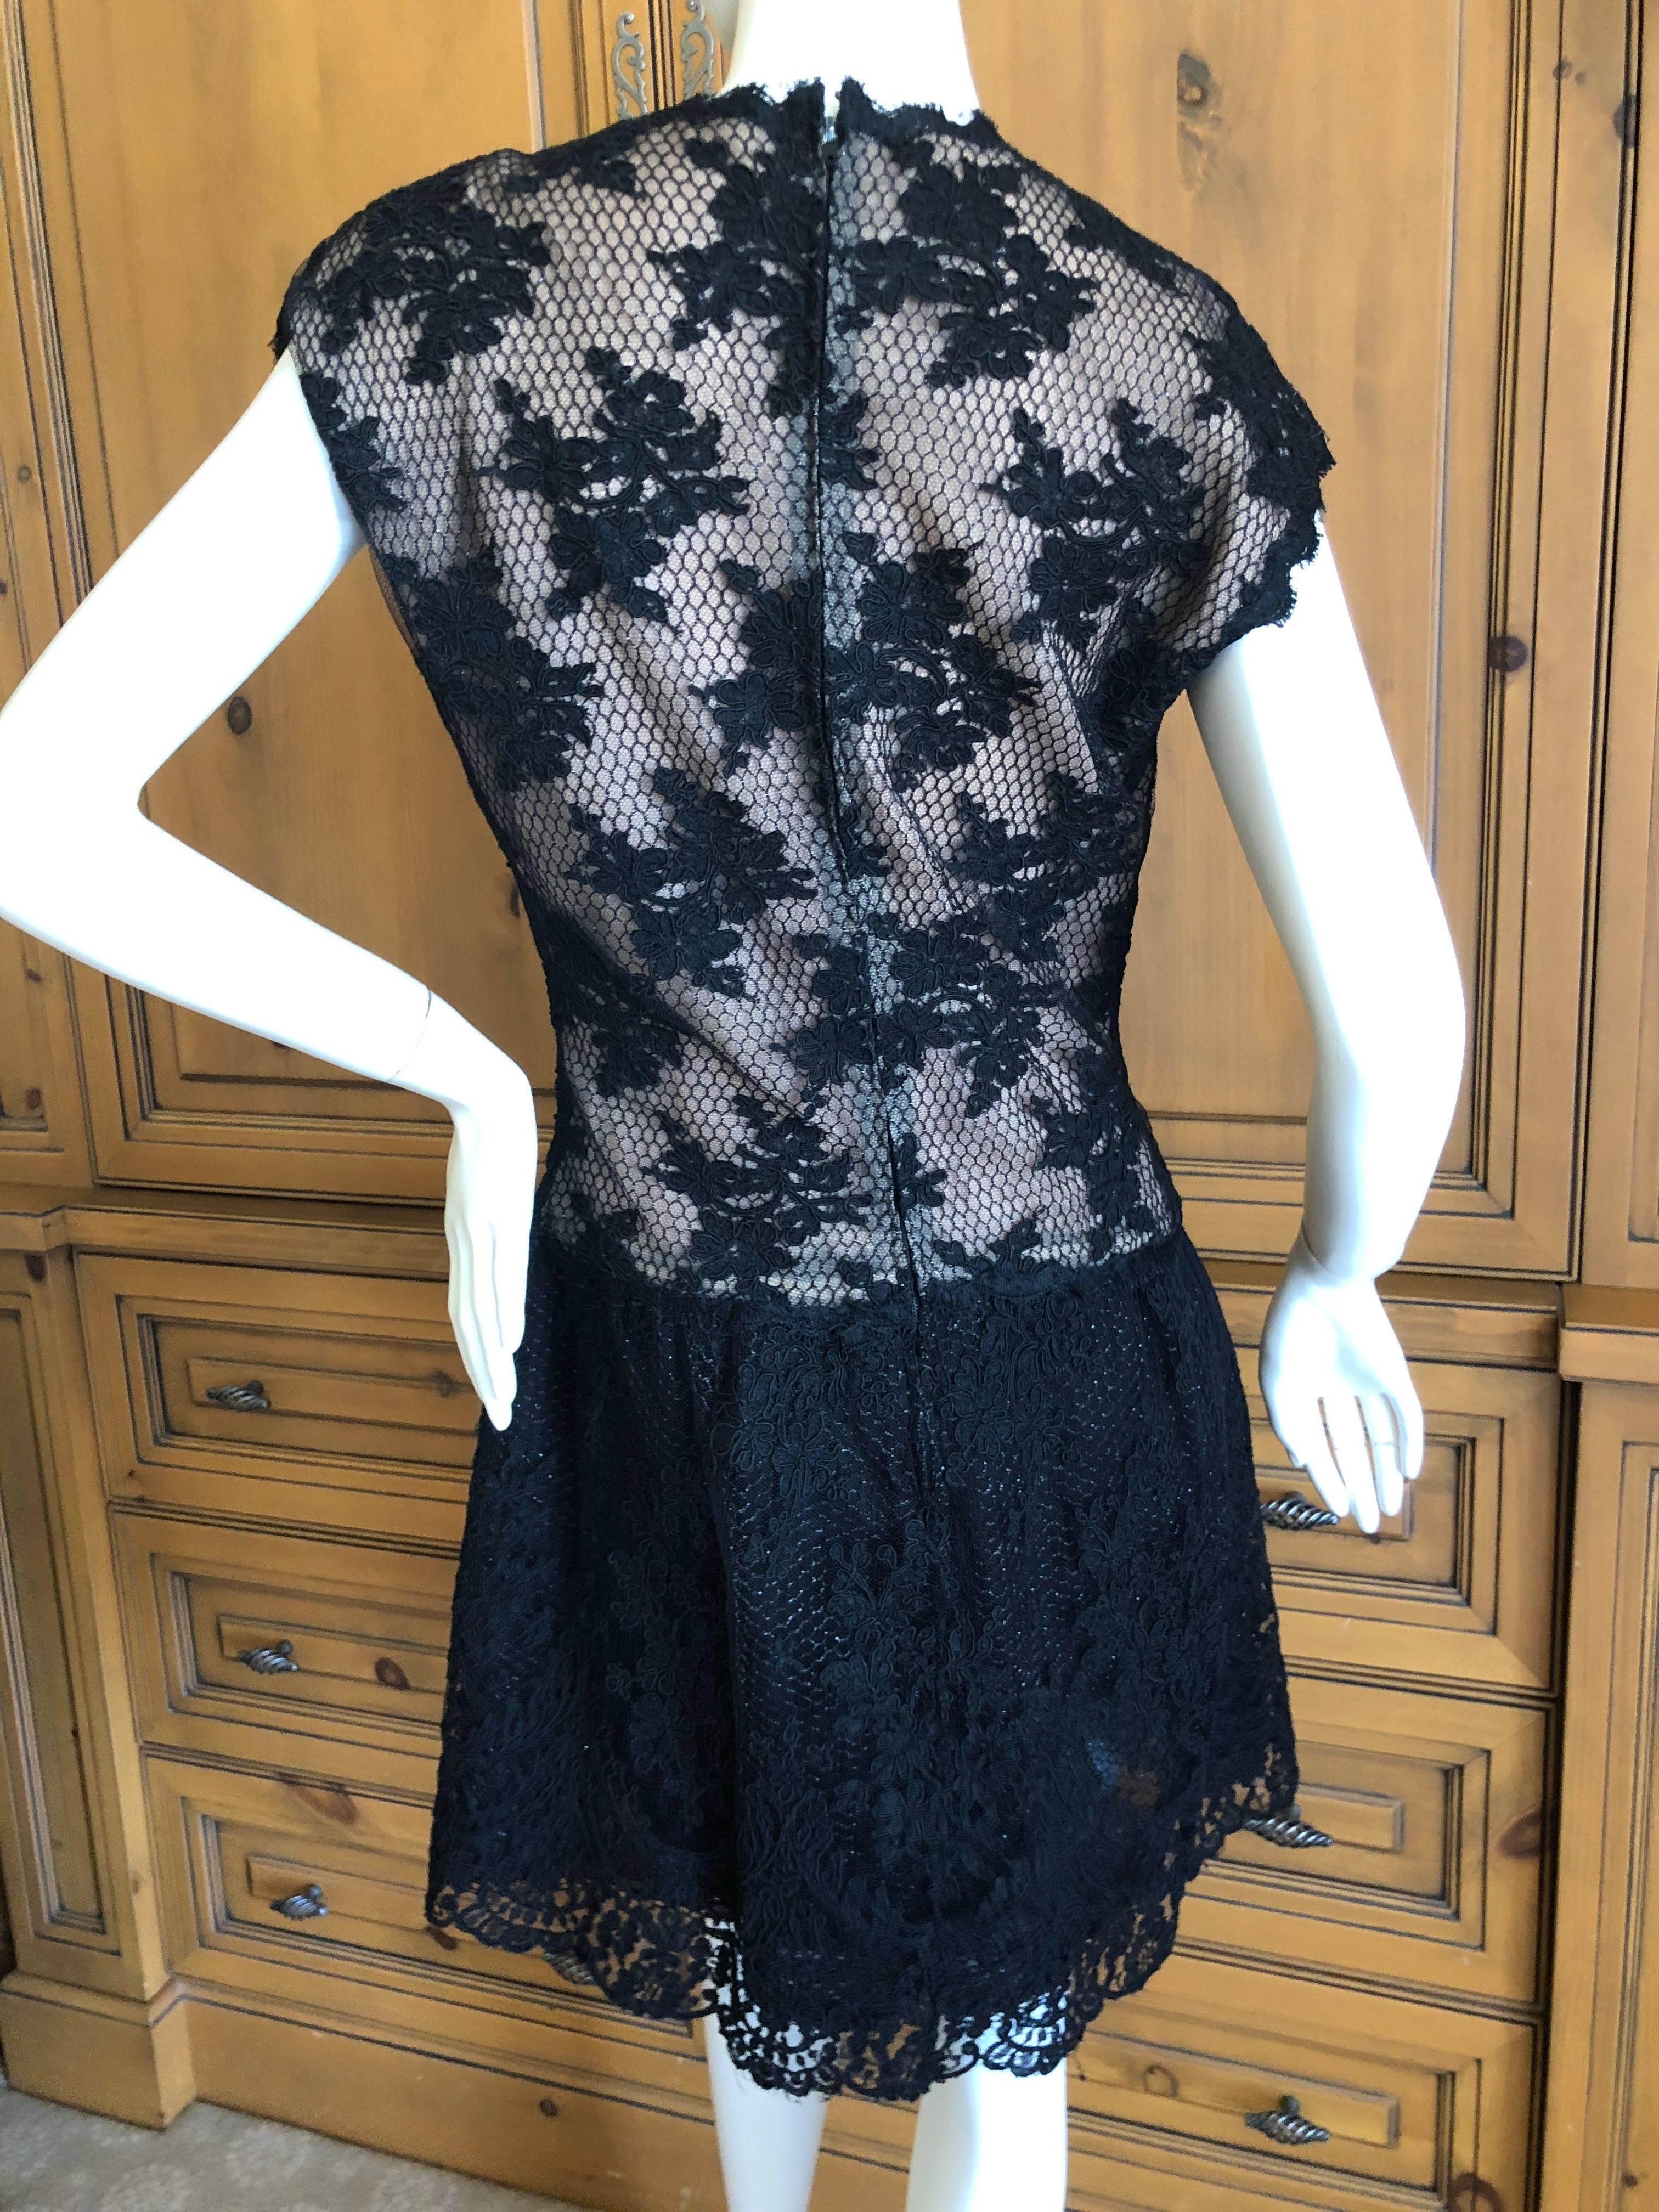 Geoffrey Beene Vintage Metallic Accented Lace Dress with Scallop Edges For Sale 5